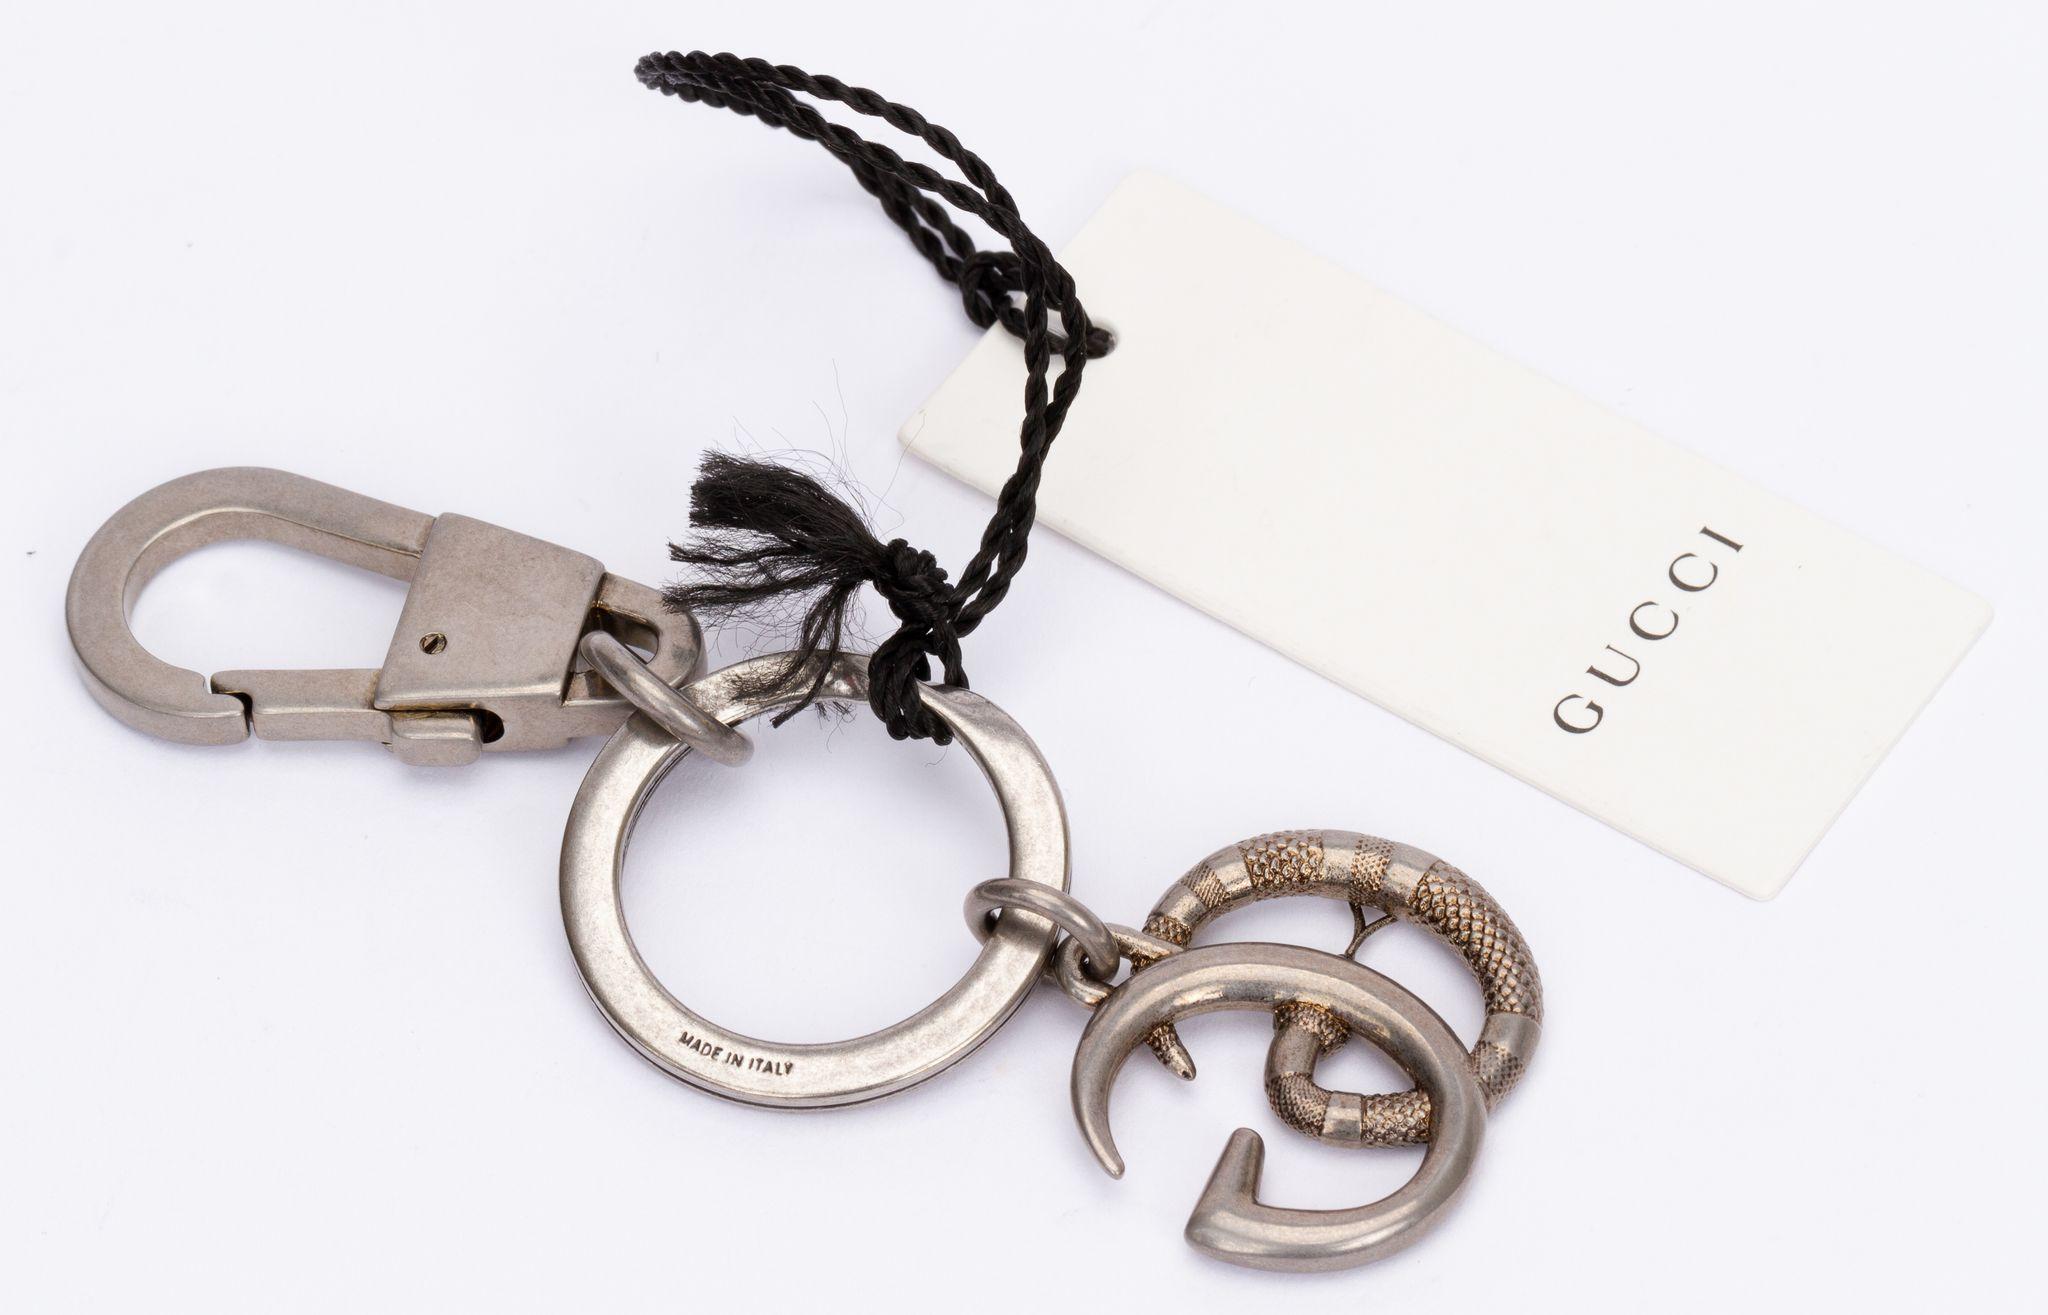 Gucci silver key ring with a GG logo charm. The piece comes with the ring and a clasp. It is brand new and includes the tag, original box and dust cover.
